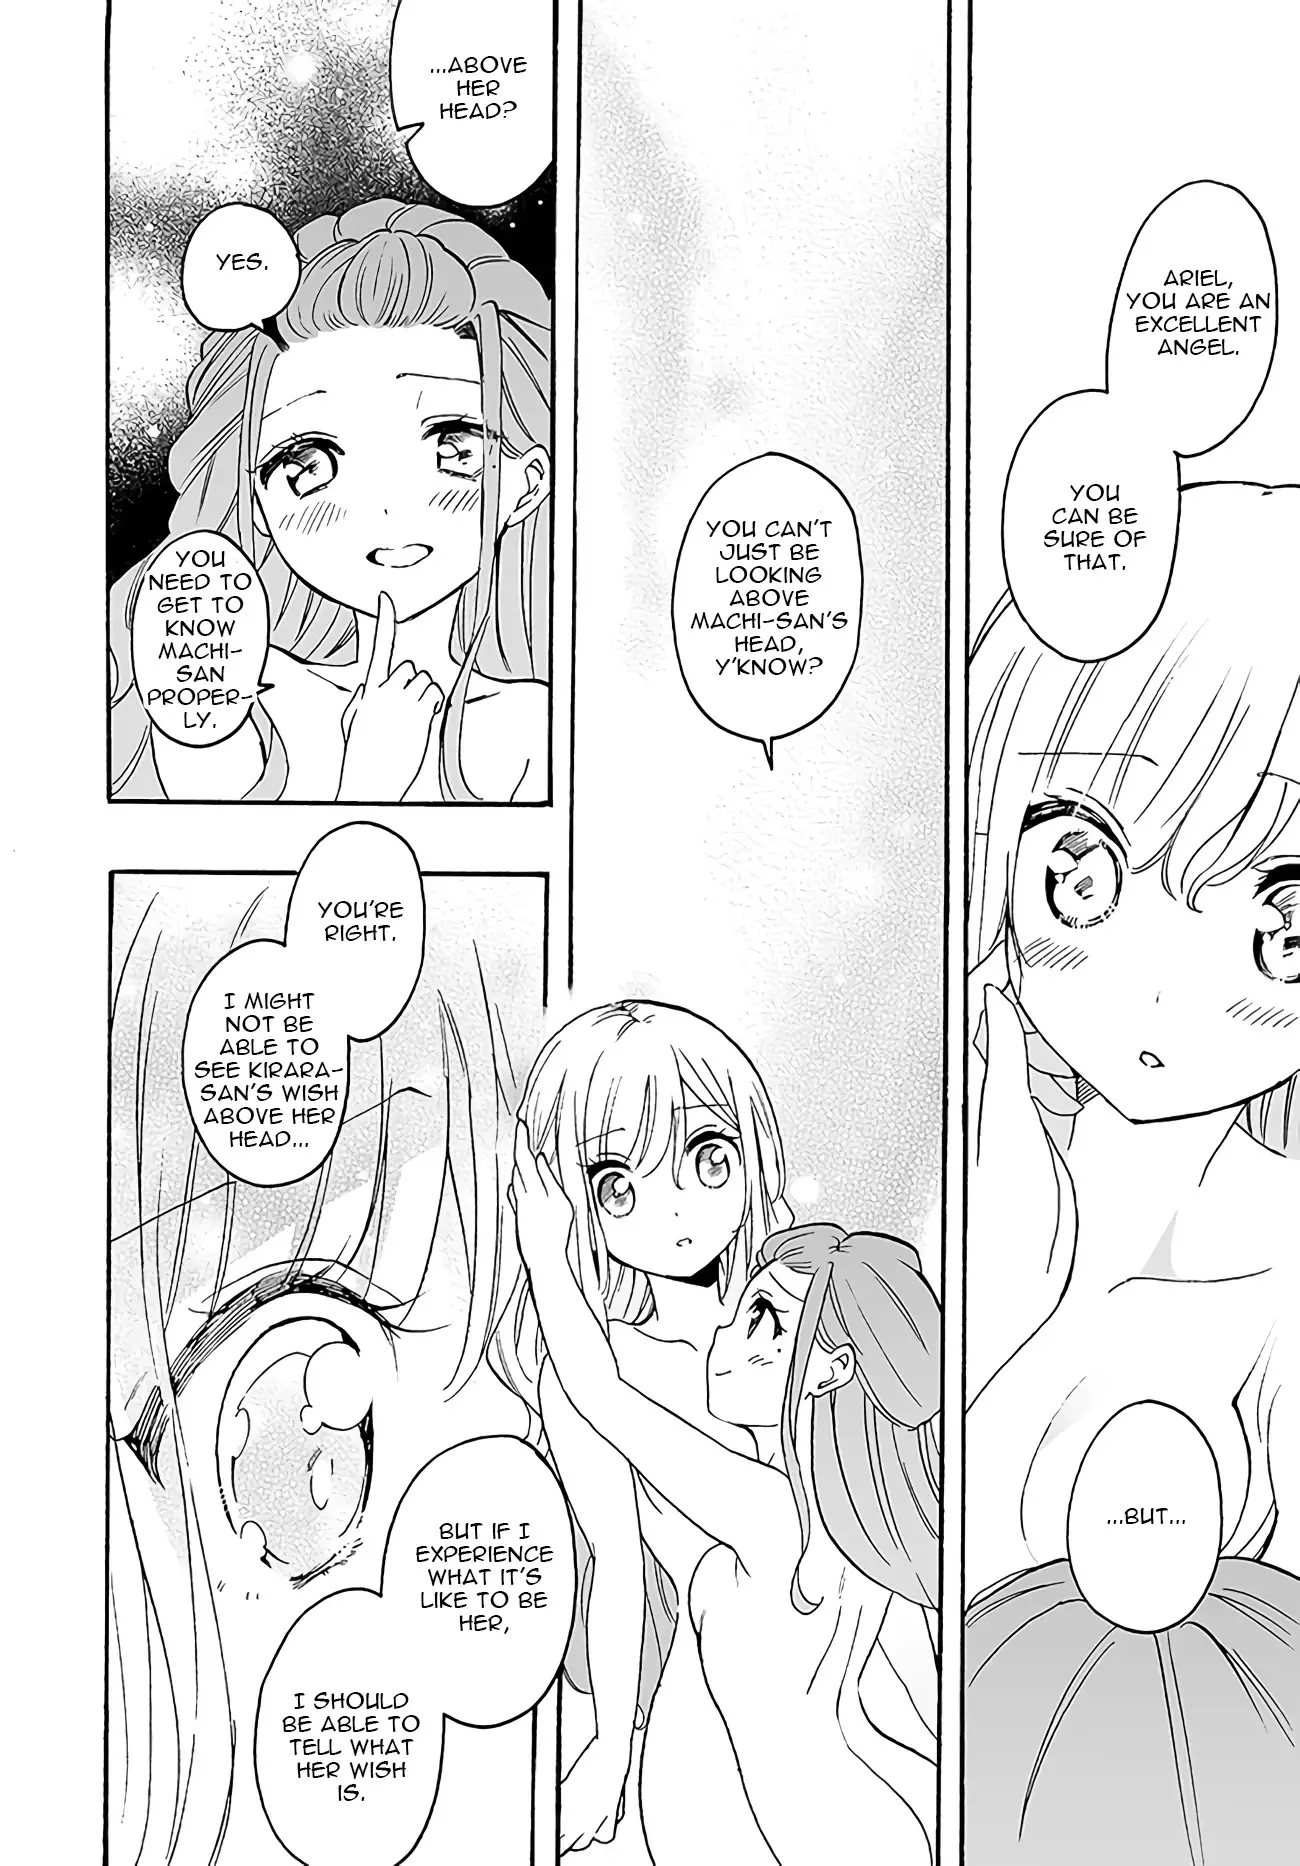 I'm An Elite Angel, But I'm Troubled By An Impregnable High School Girl - 8 page 6